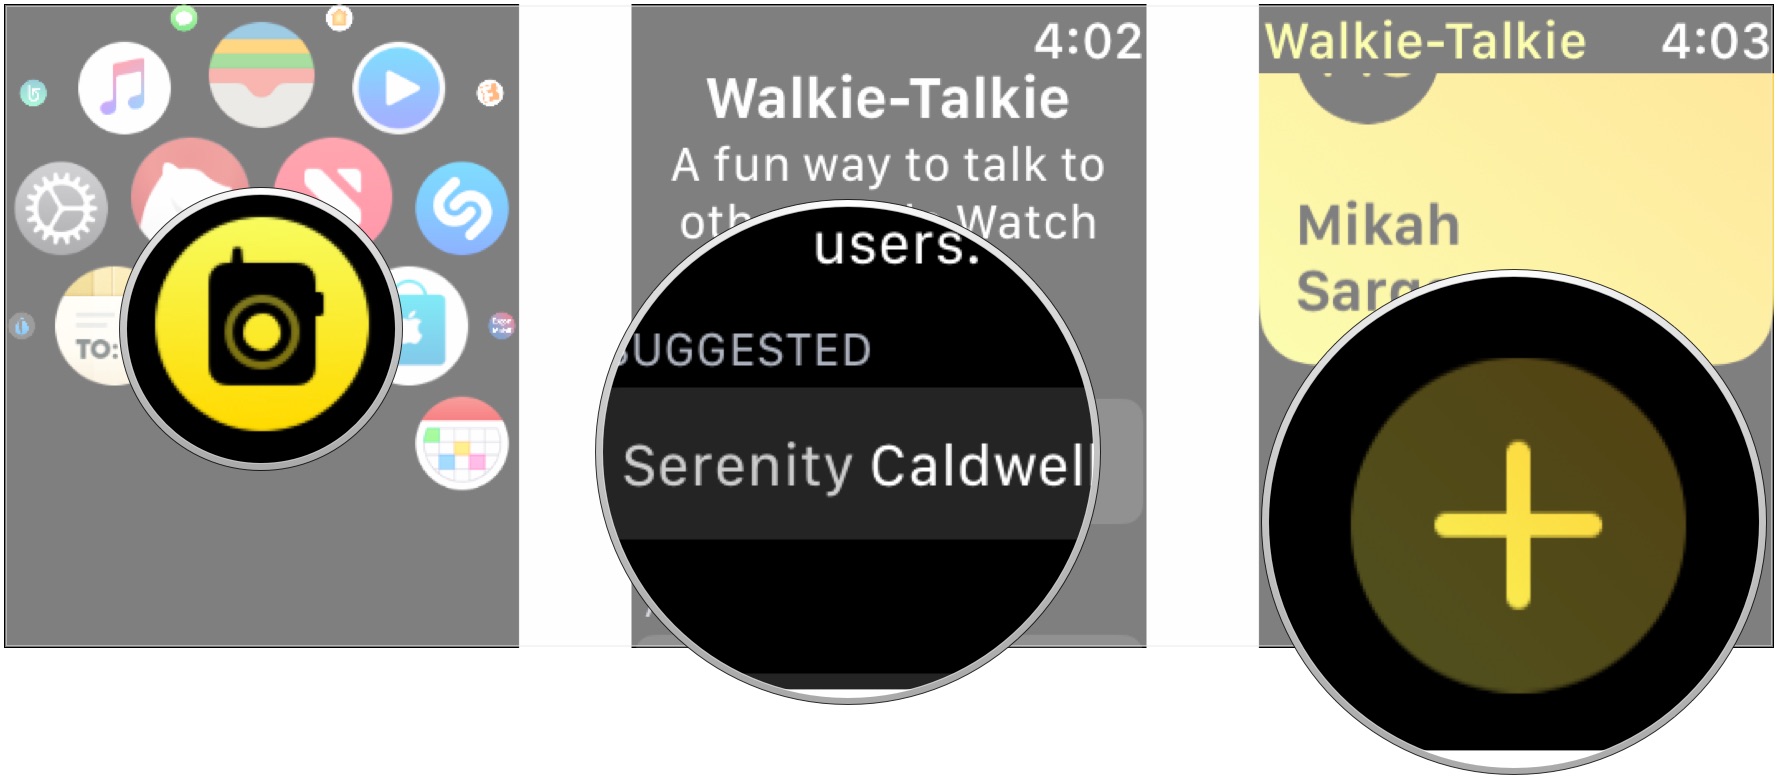 Open Walkie-Talkie, tap contact name, tap +